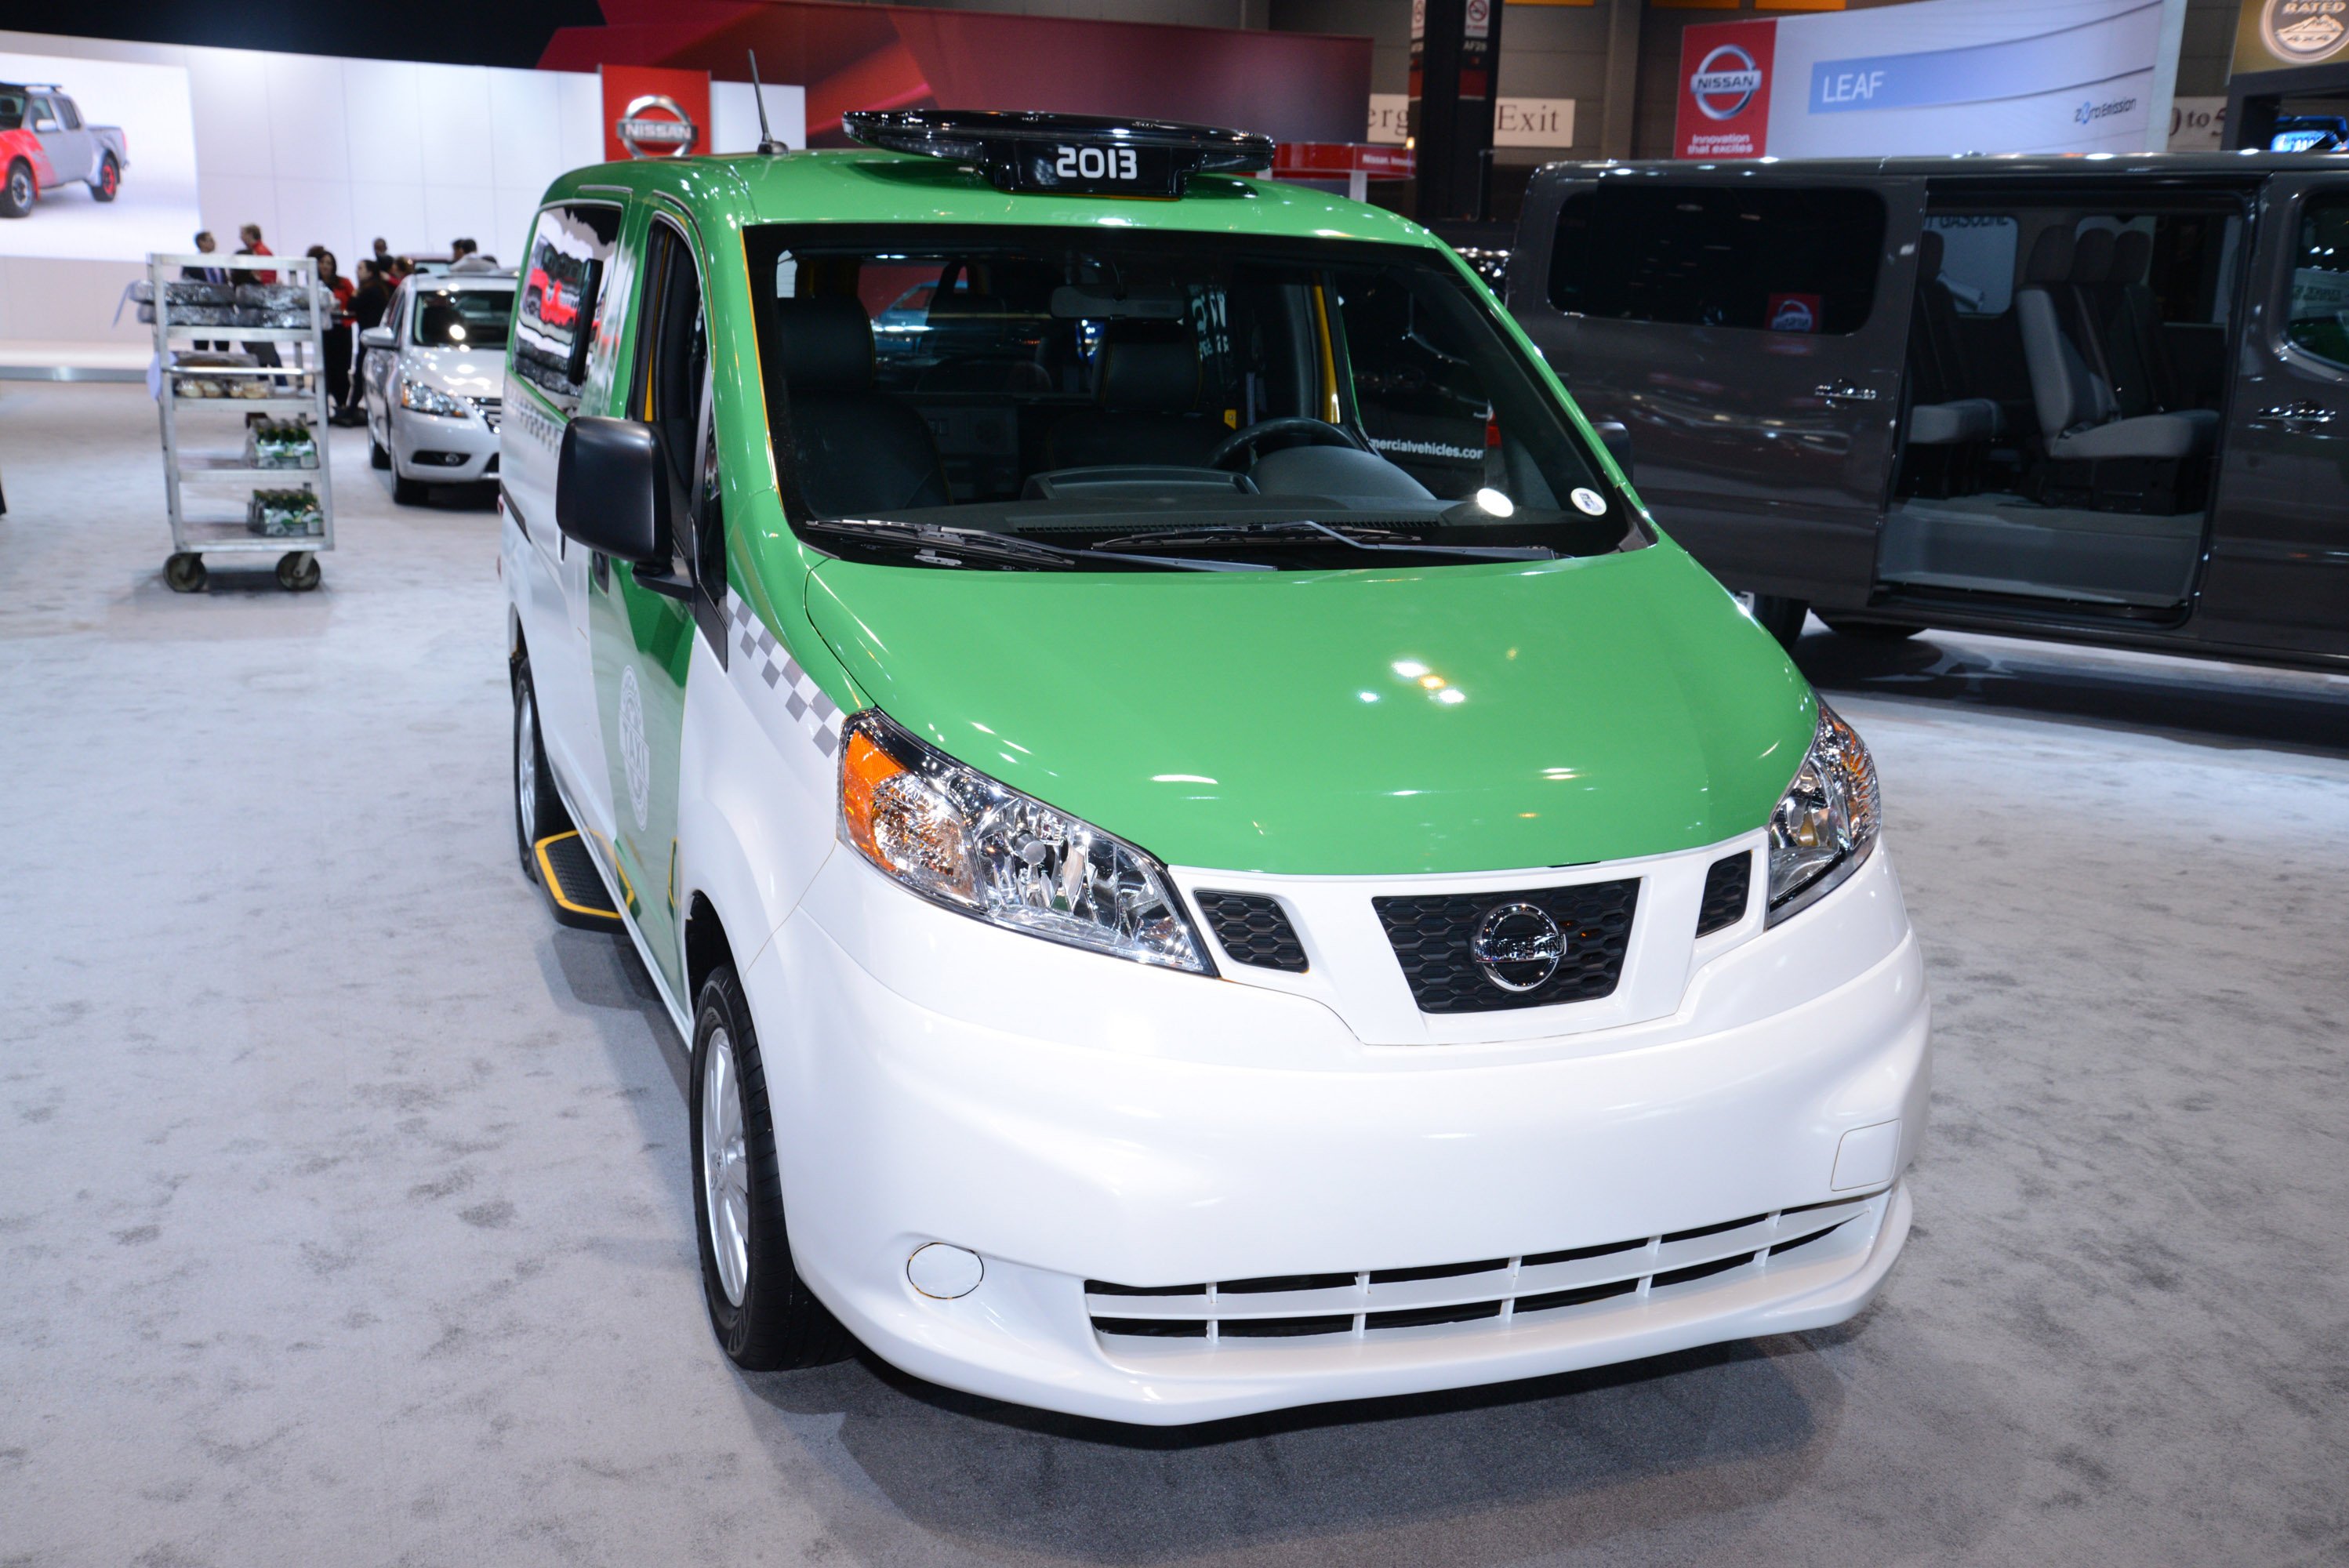 Nissan Chicago NV200 Taxi Chicago